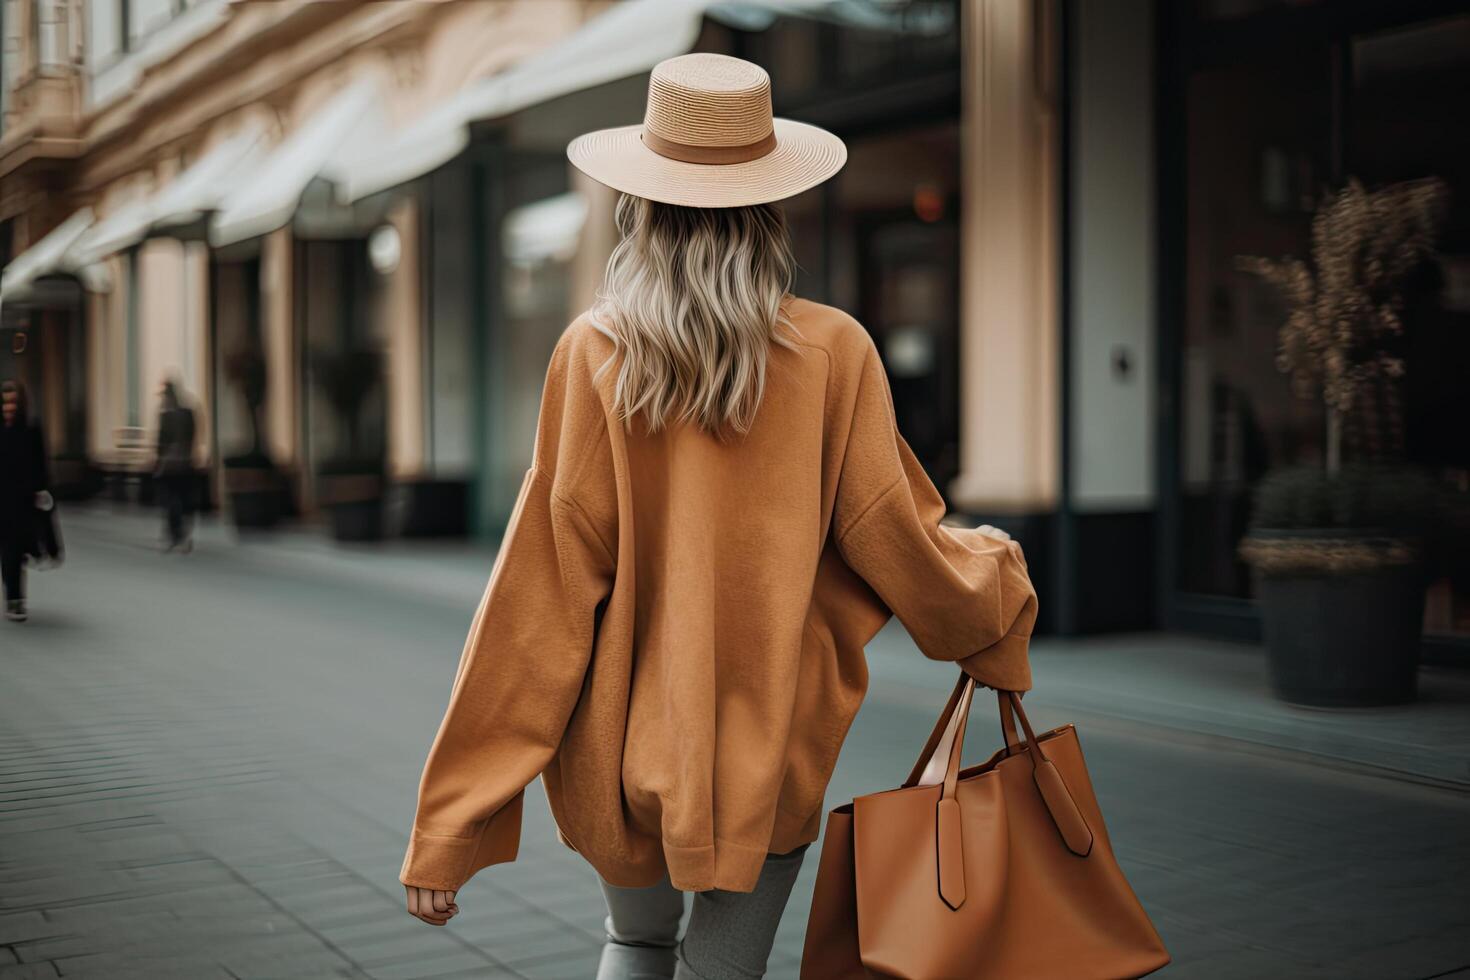 stylish young woman in hat and coat walking with shopping bags in city, A stylish Womens rear view walking with a shopping bag, photo